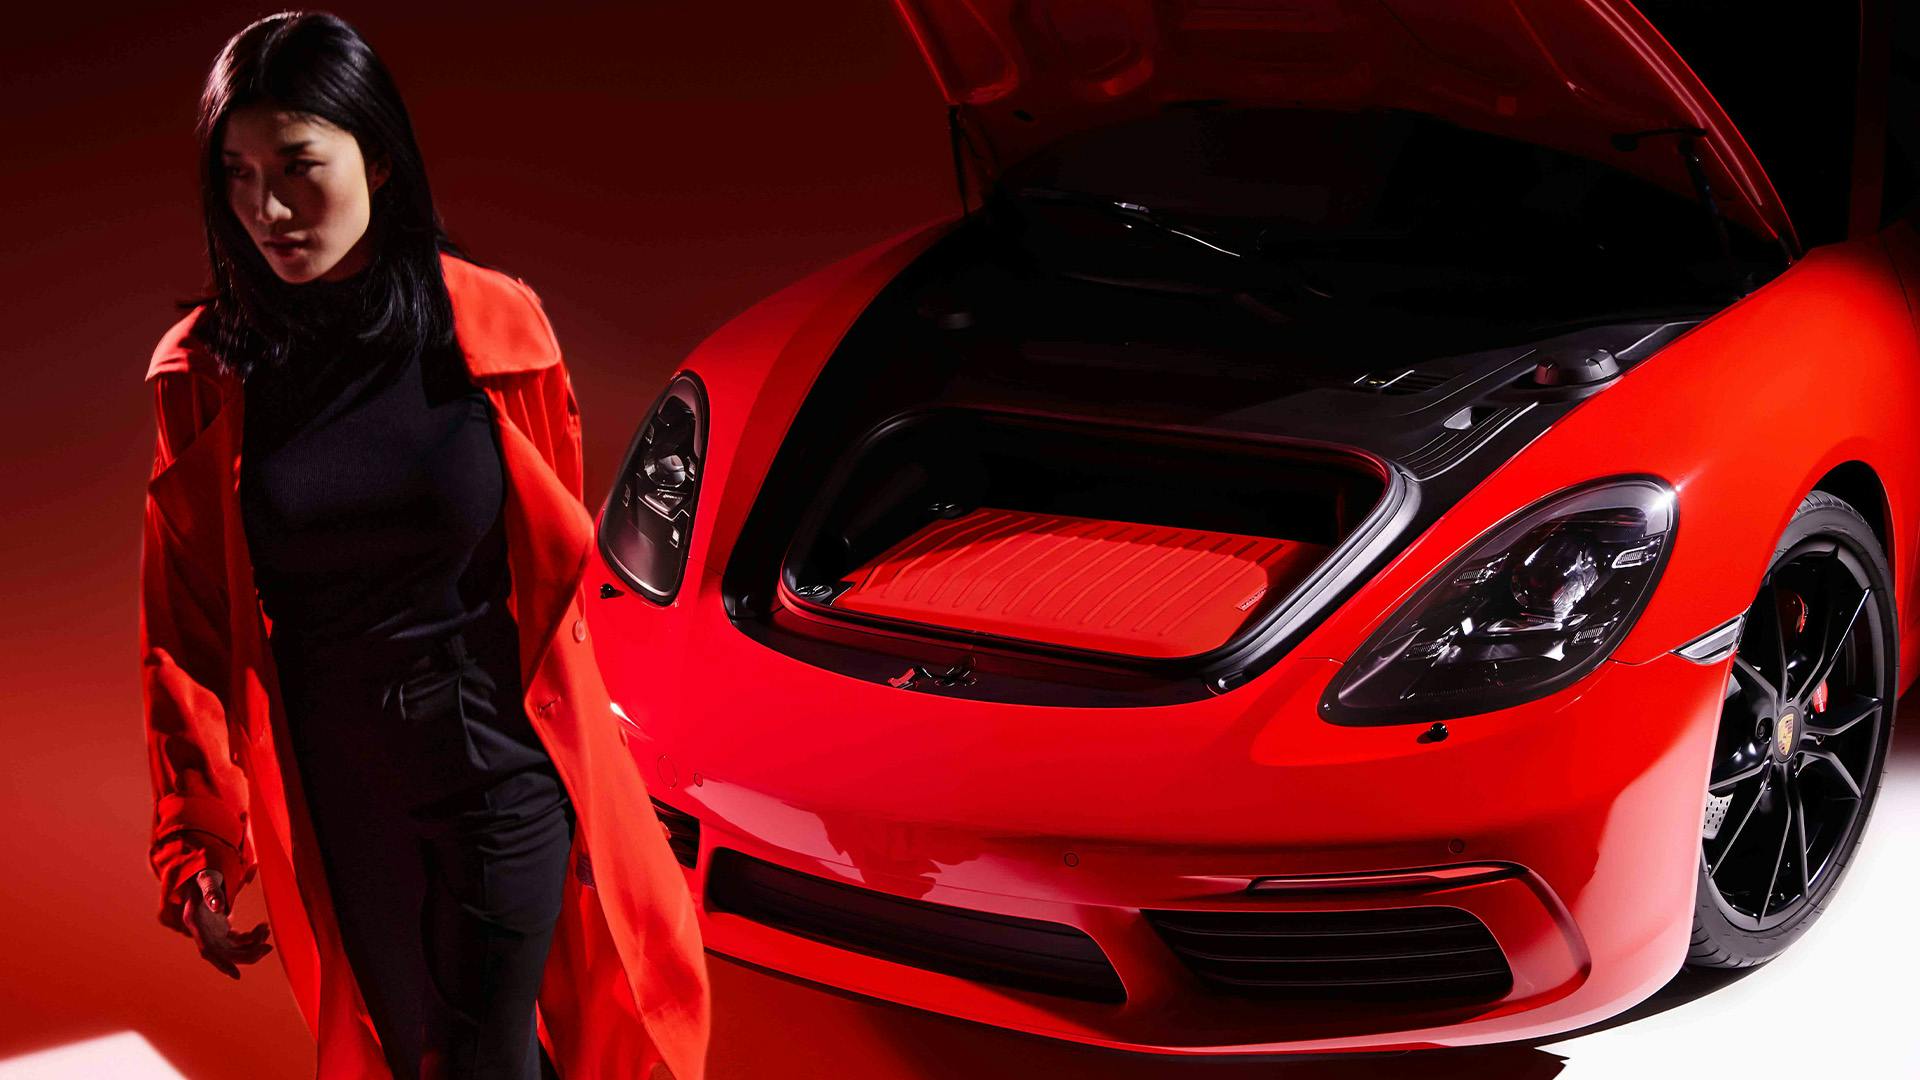 Woman wearing black clothing and a red coat walking away from a red Porsche 911, containing a red Porsche Design Hardcase Trolley in the front luggage compartment.